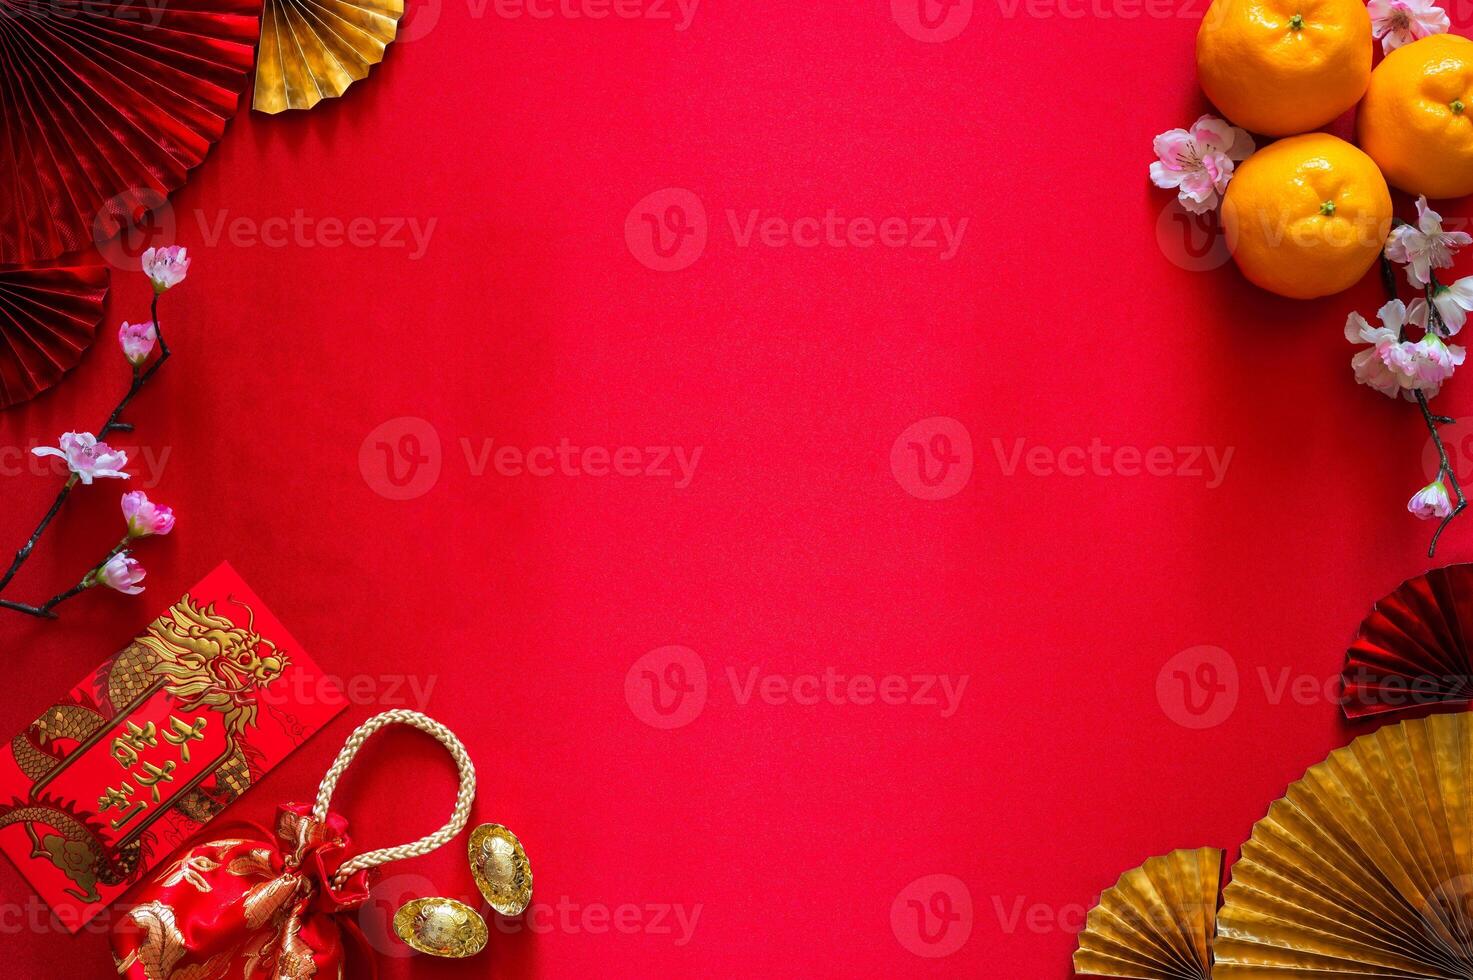 Chinese new year concept with red envelope packets or ang bao word mean auspice, red bag, ingots word mean wealth and oranges on red cloth background. photo